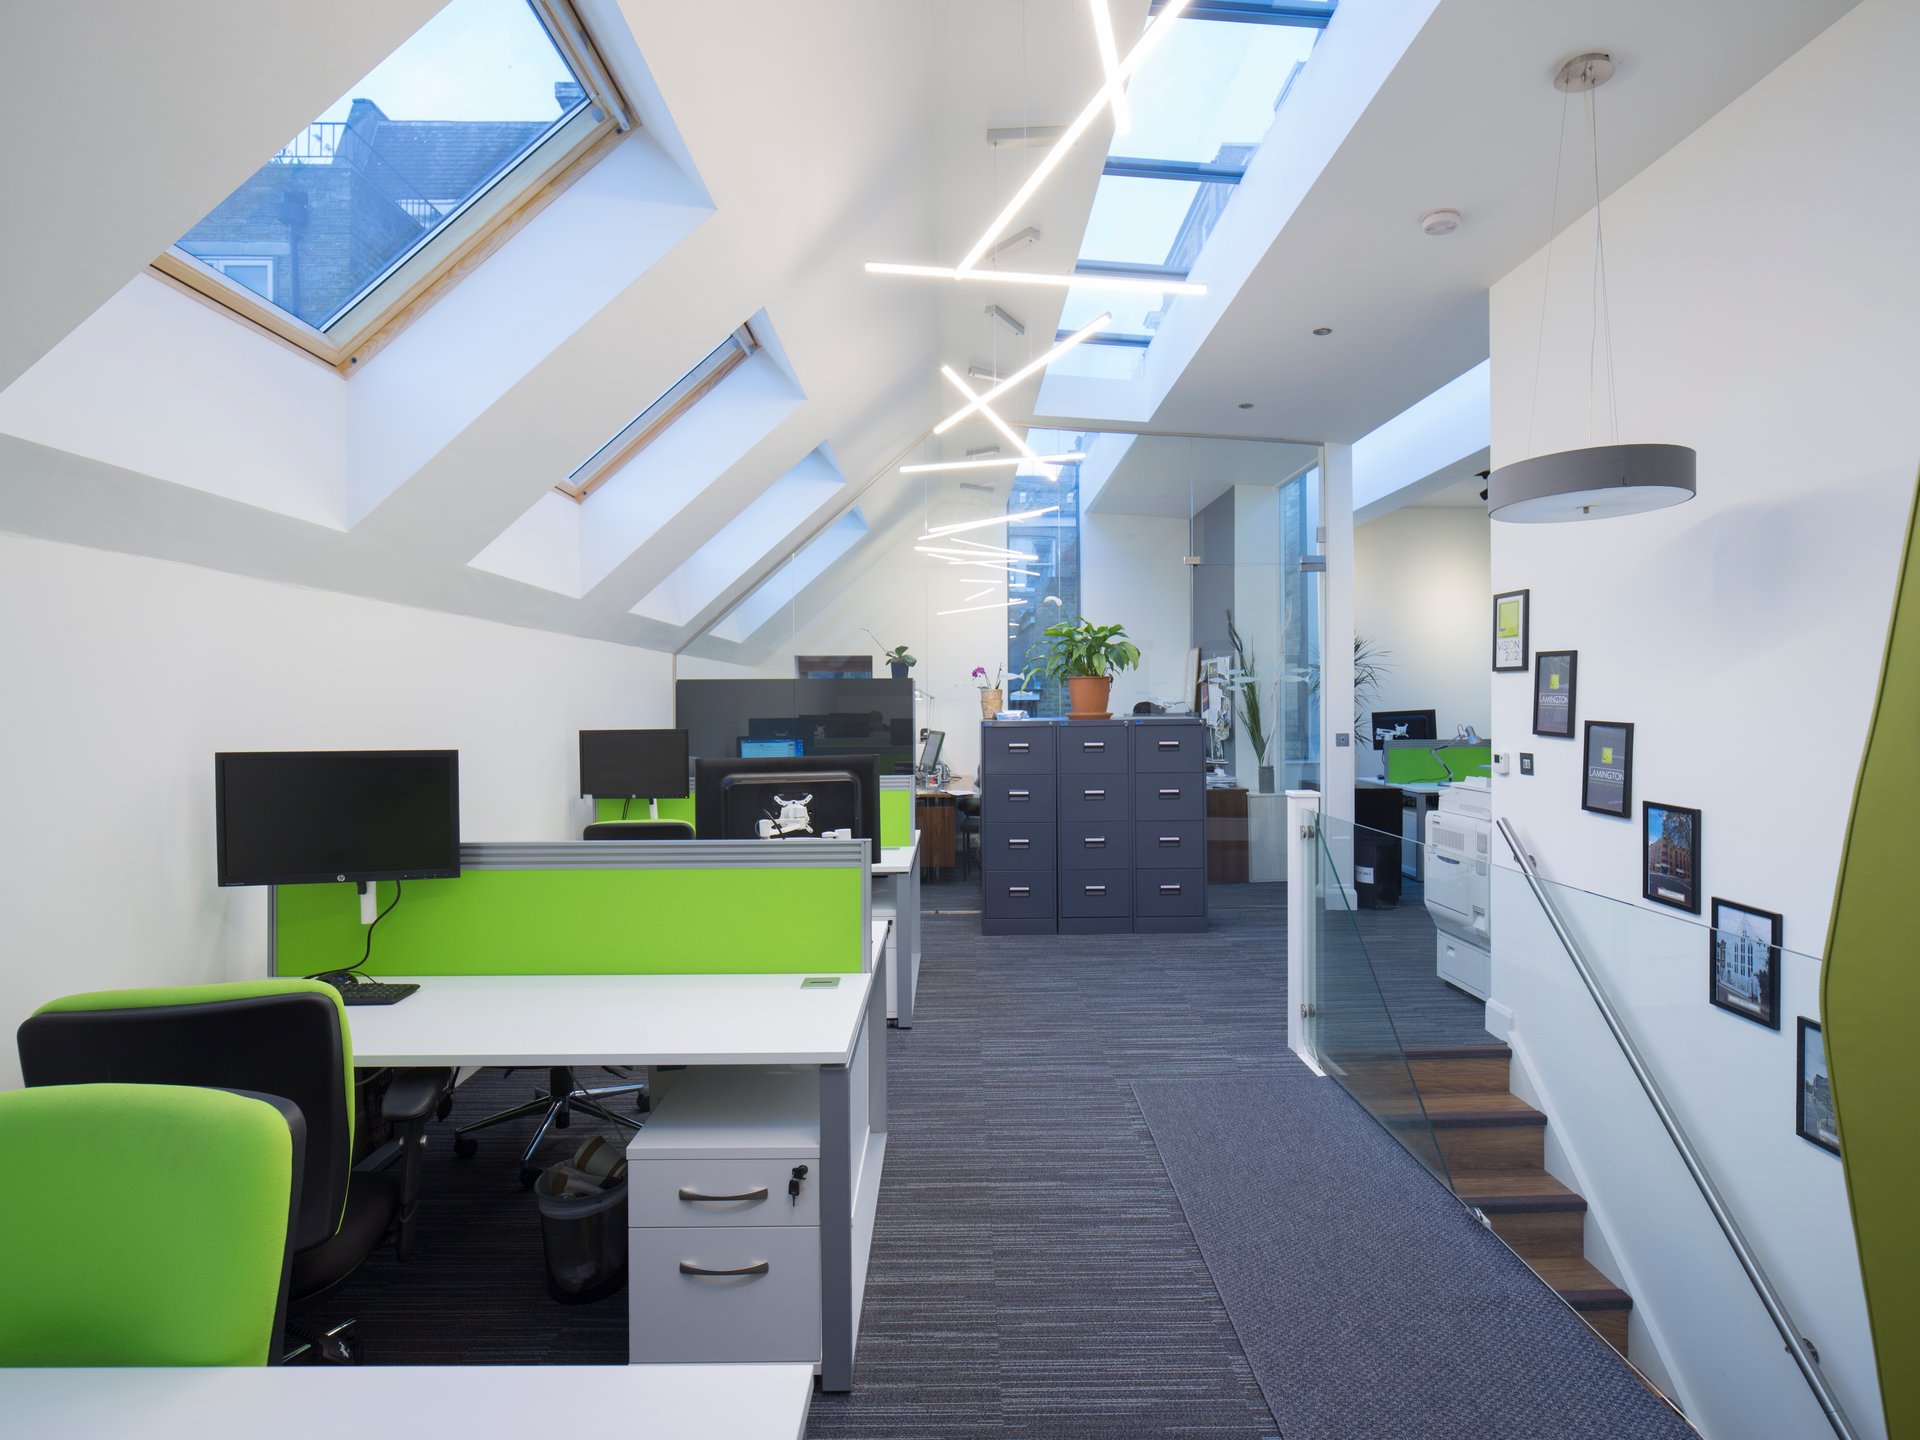 Interior of Hammersmith Grove Architectural Office